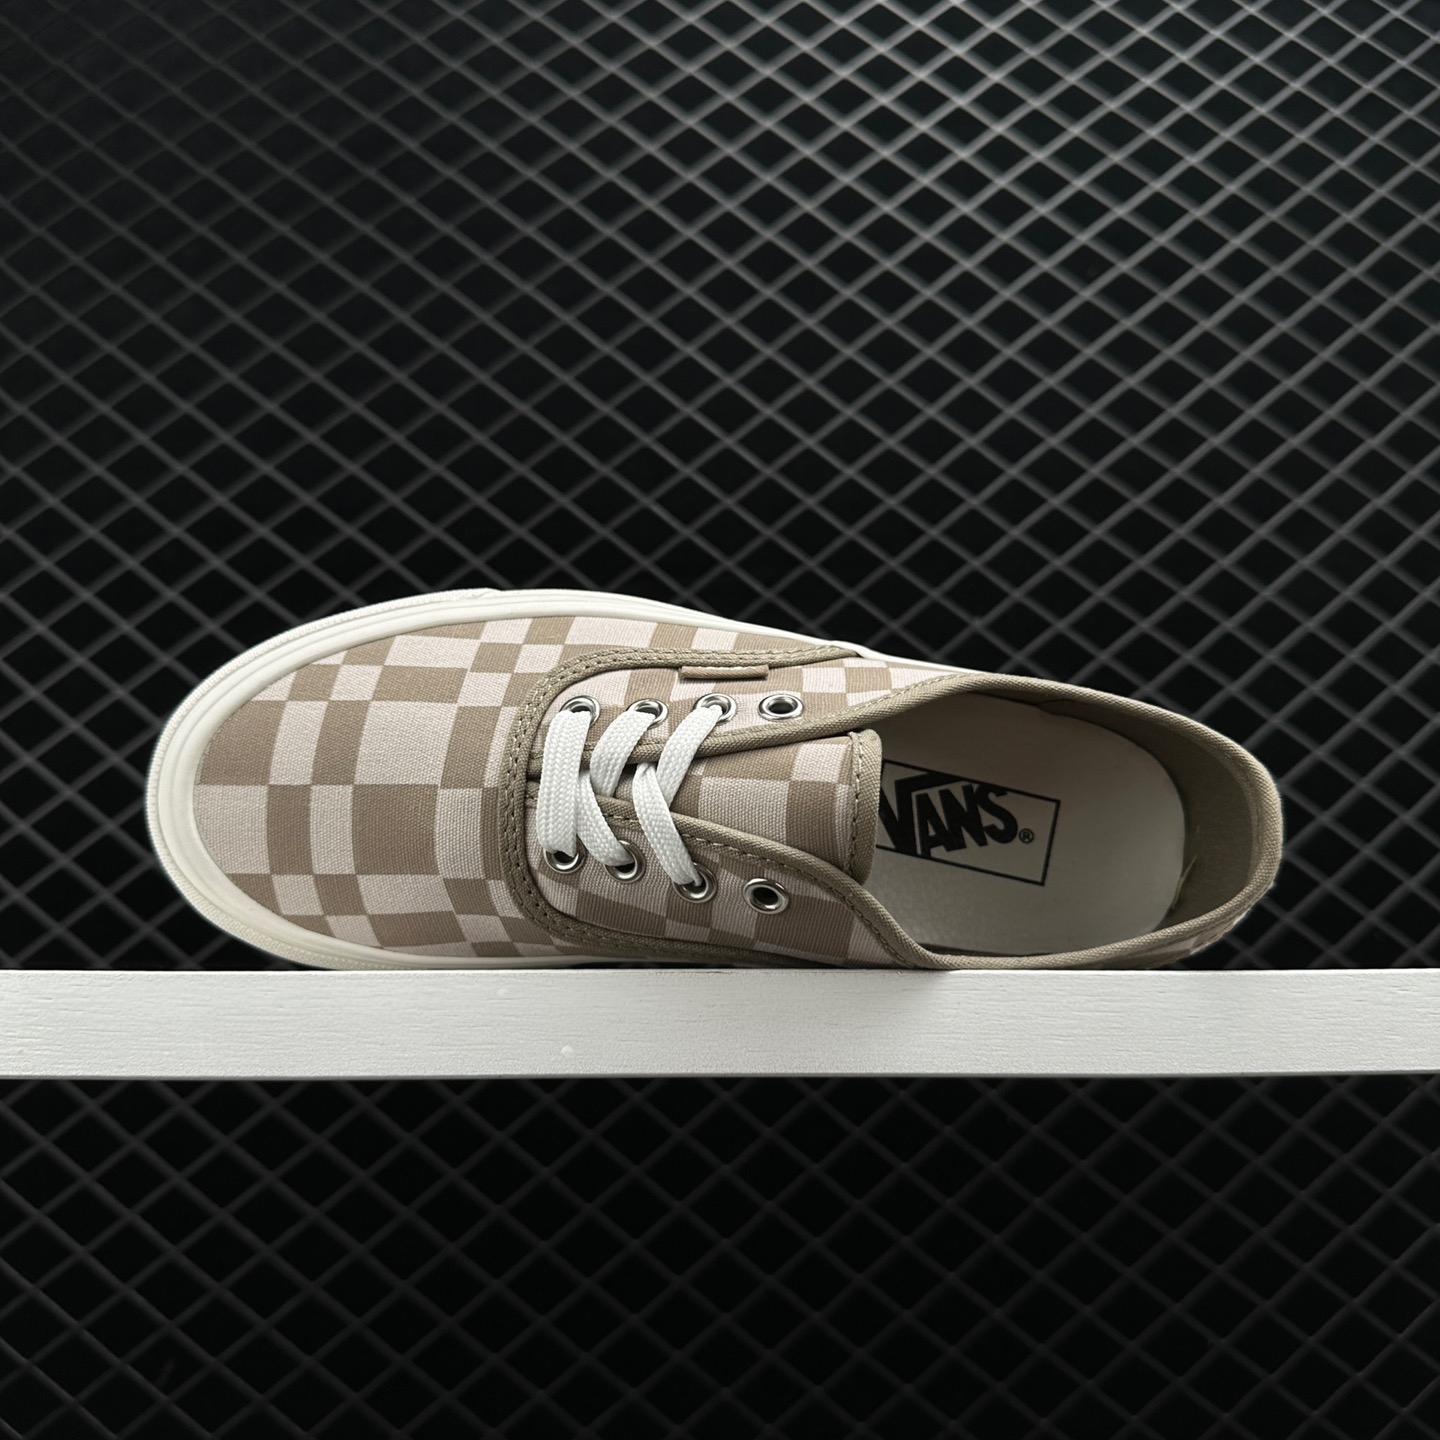 Vans Authentic Woven Check 44 DX Gray White - Stylish and Versatile Footwear